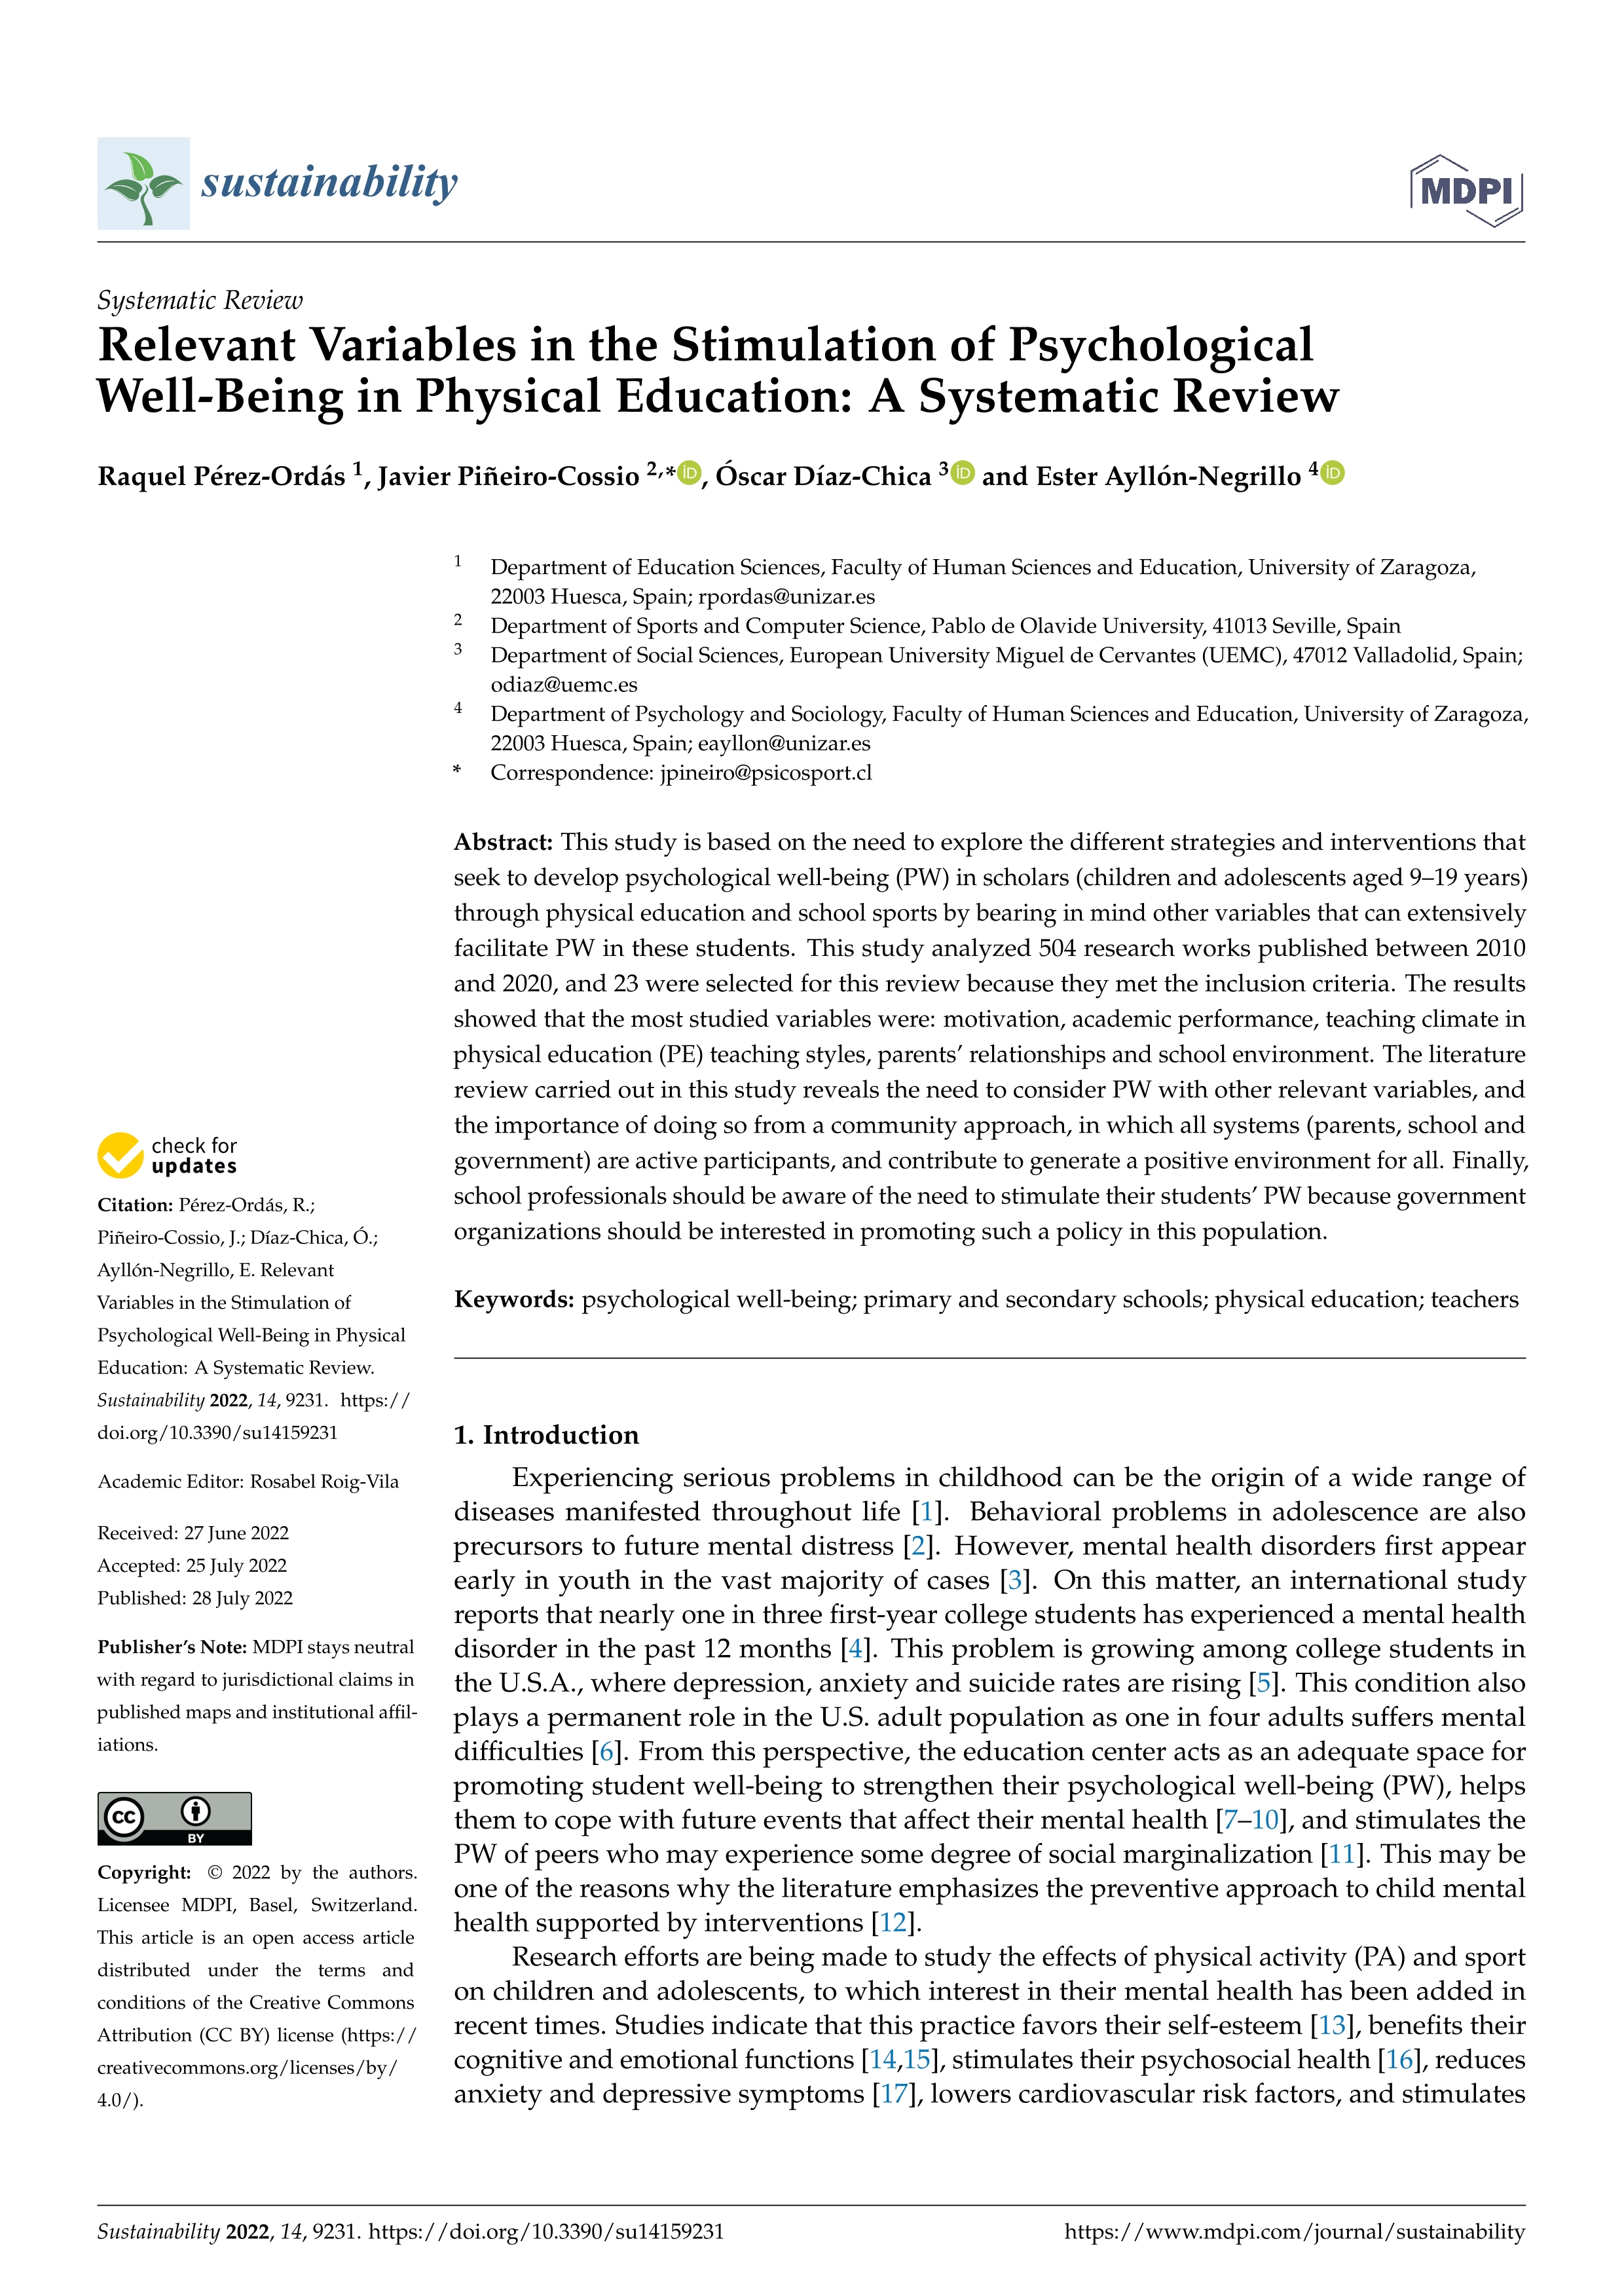 Relevant Variables in the Stimulation of Psychological Well-Being in Physical Education: A Systematic Review